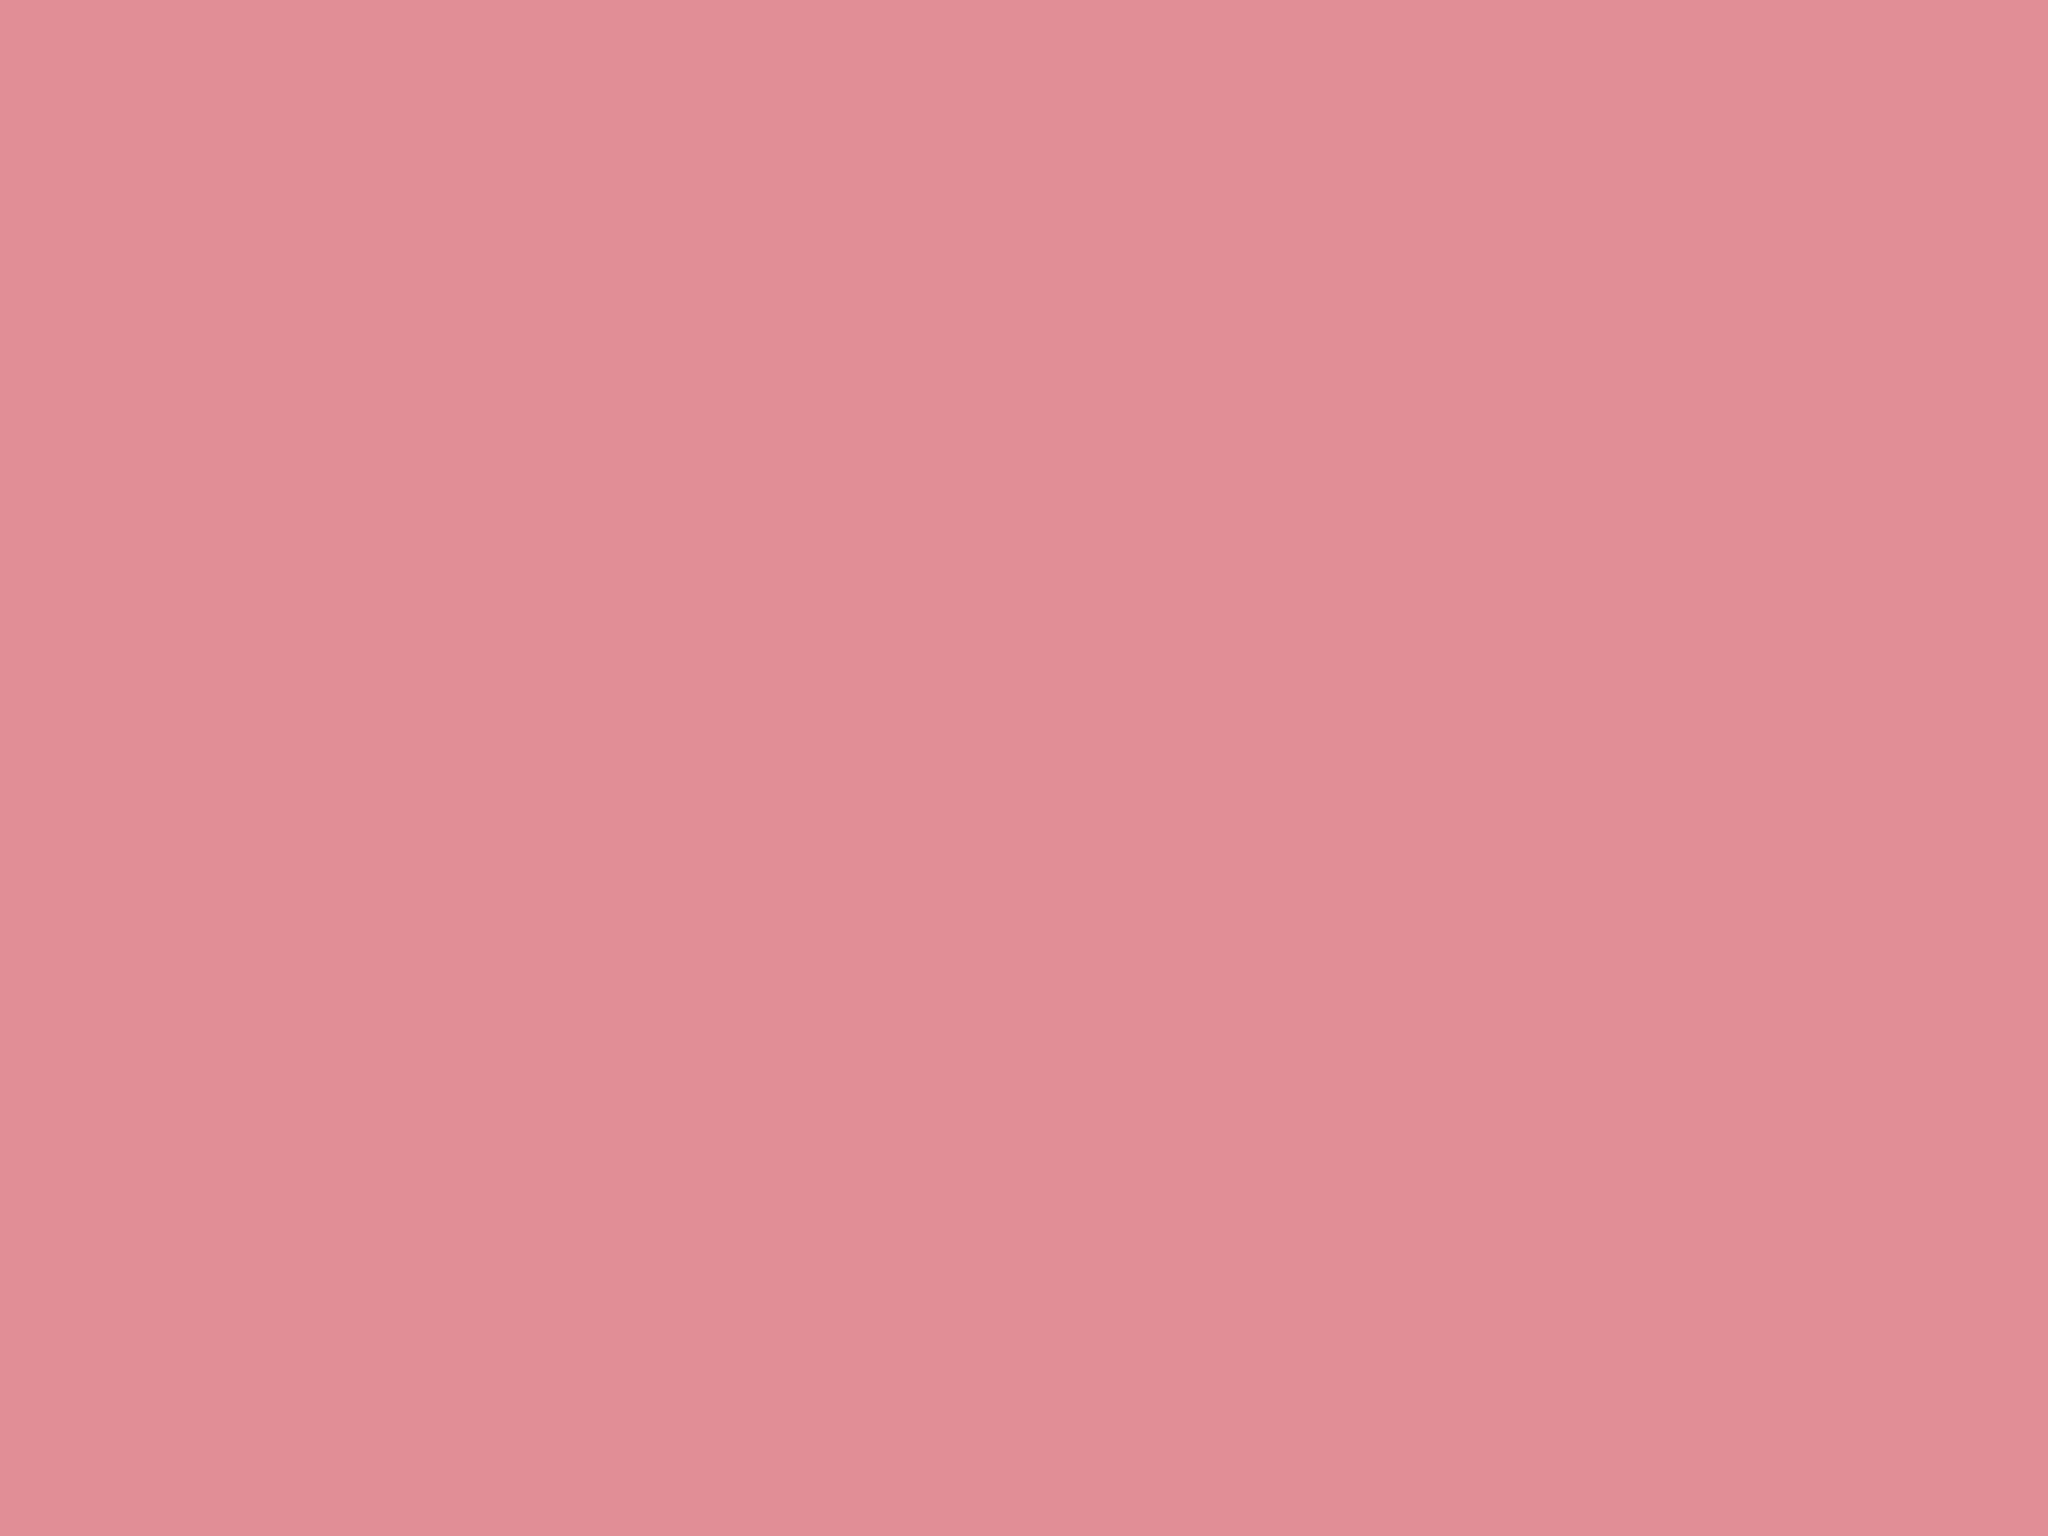 2048x1536 Ruddy Pink Solid Color Background